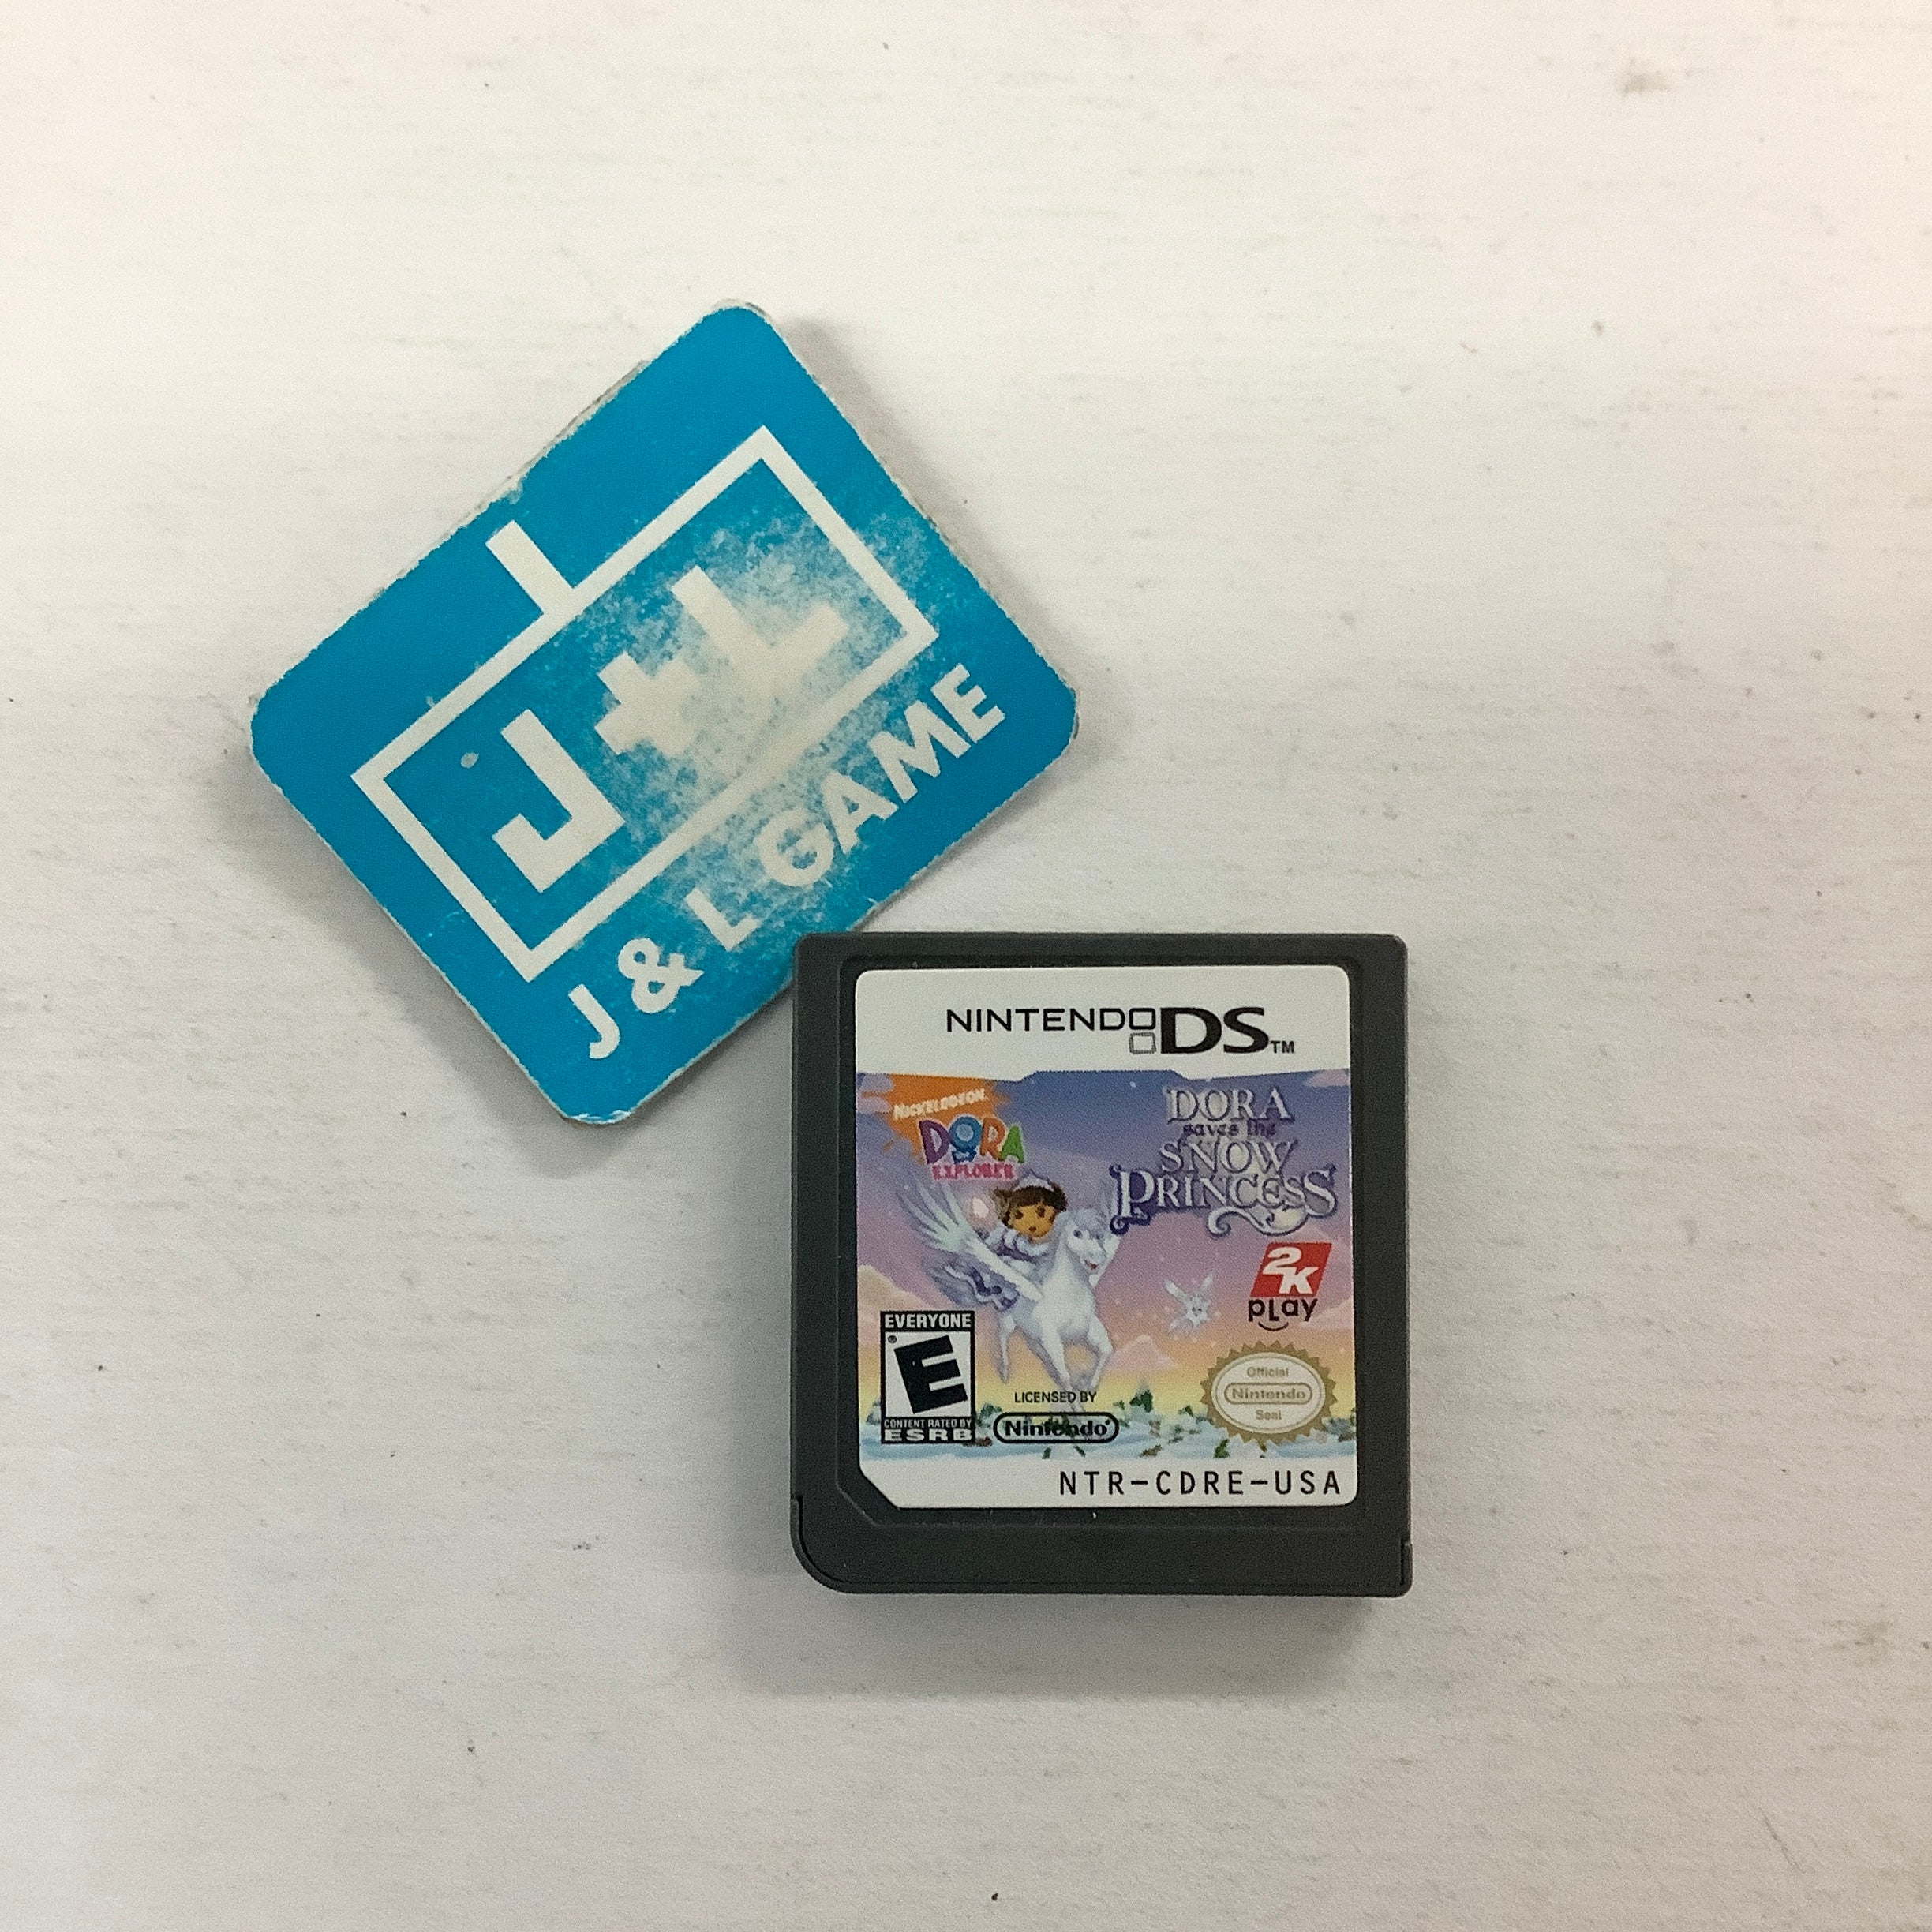 Dora Saves the Snow Princess - (NDS) Nintendo DS [Pre-Owned] Video Games Take-Two Interactive   